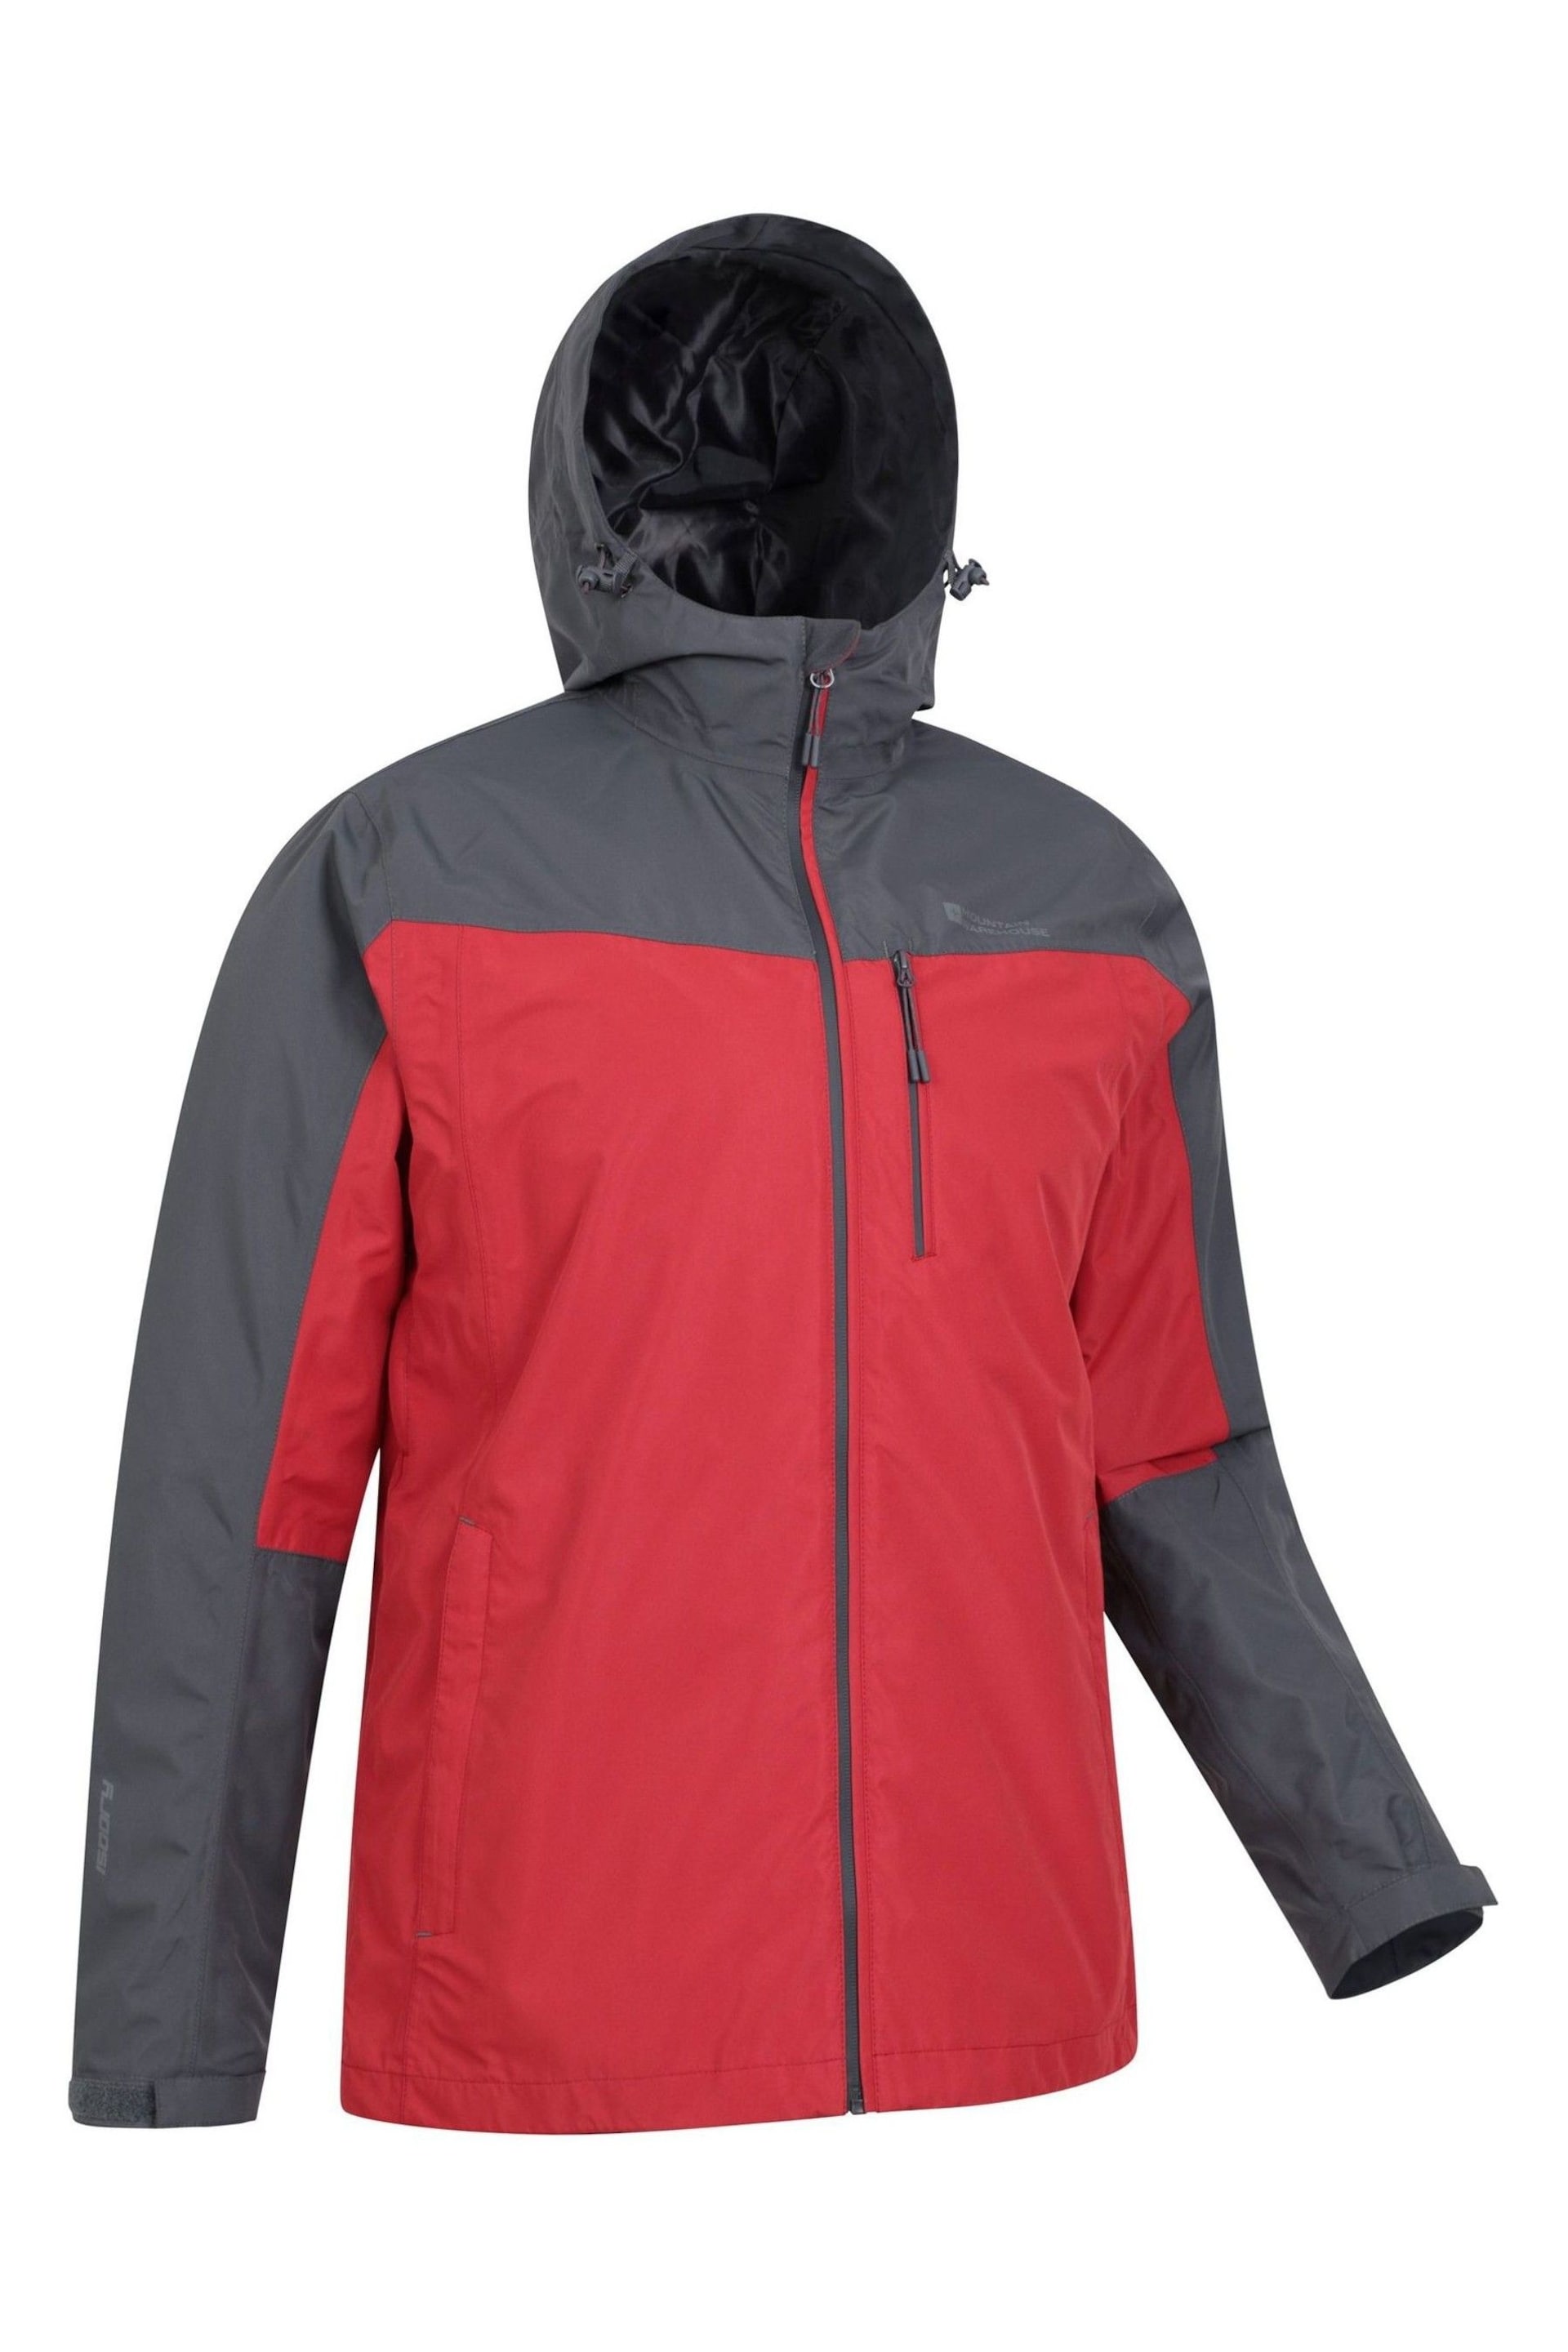 Mountain Warehouse Red Mens Brisk Extreme Waterproof Jacket - Image 2 of 5